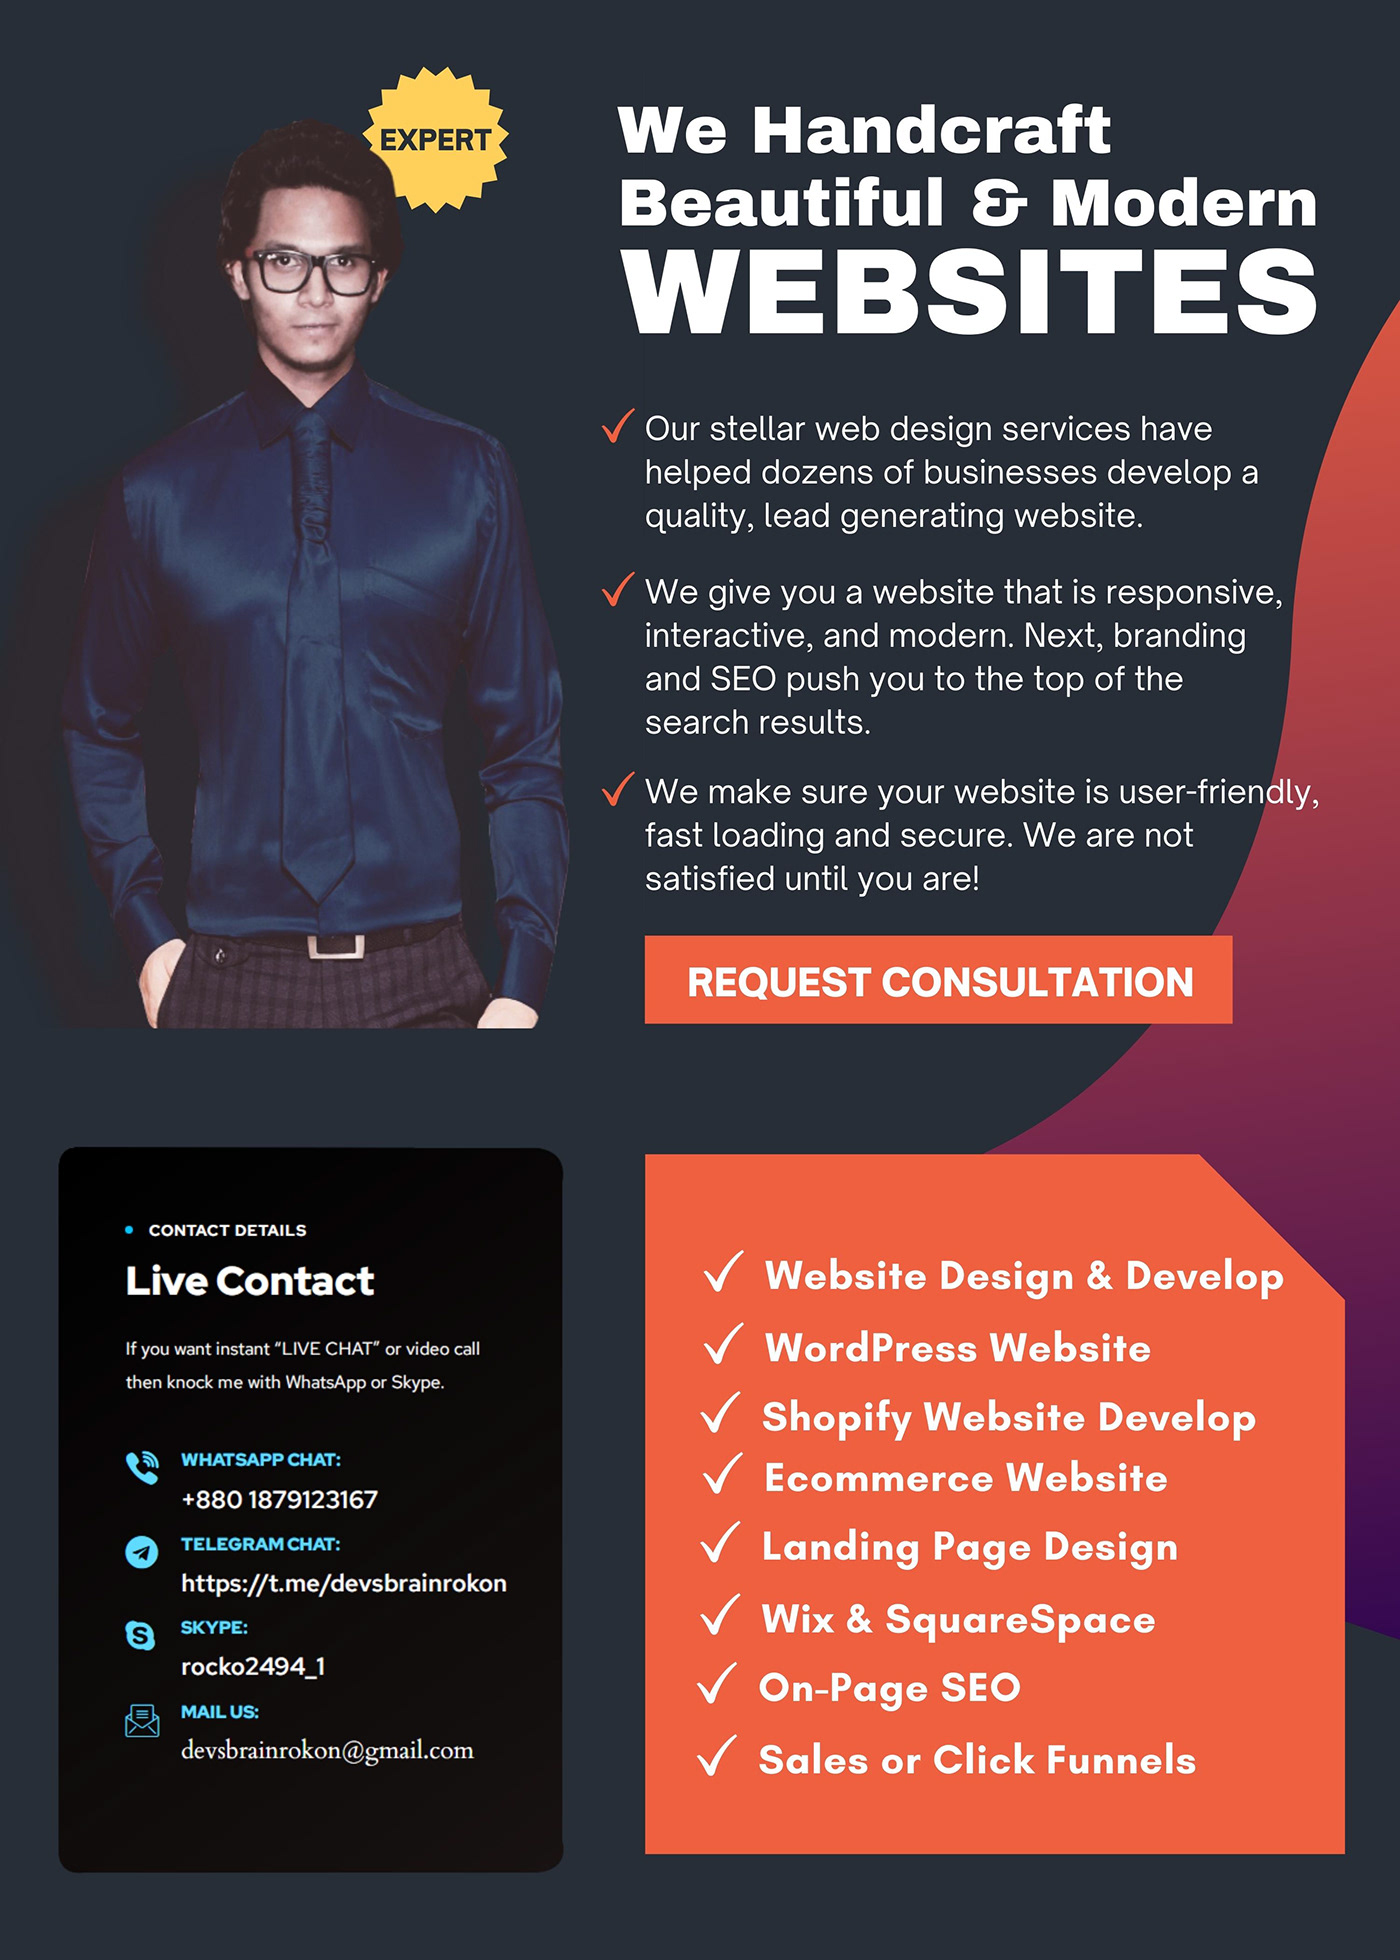 elementor landing page elementor Sales pages Elementor Website landing page landing page design Landing Page WordPress Shopify UI ux WordPress Landing